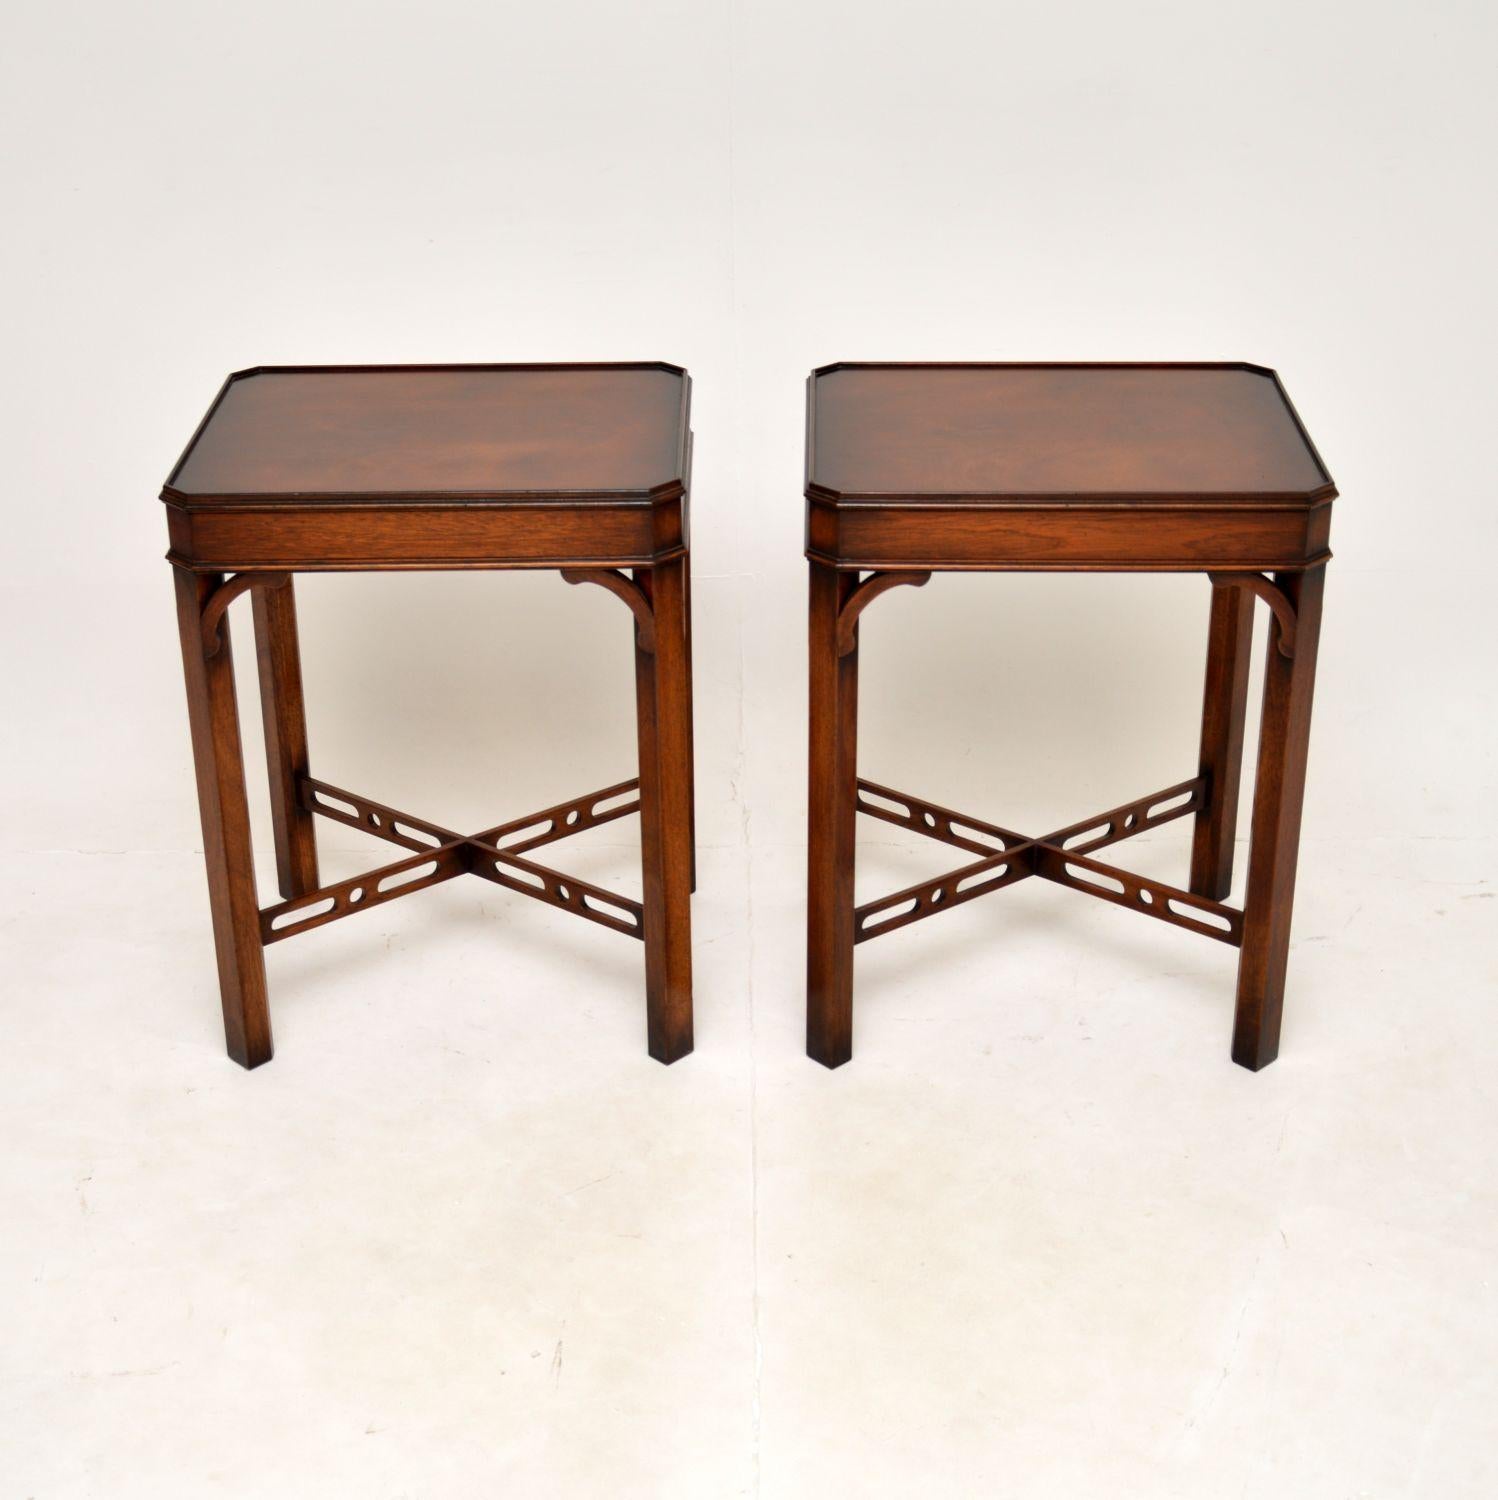 A smart and very useful pair of antique side tables in the Georgian style. There were made in England, they date from around the 1950’s.

They are of excellent quality and are a useful size to be used as lamp tables. The rectangular tops have canted